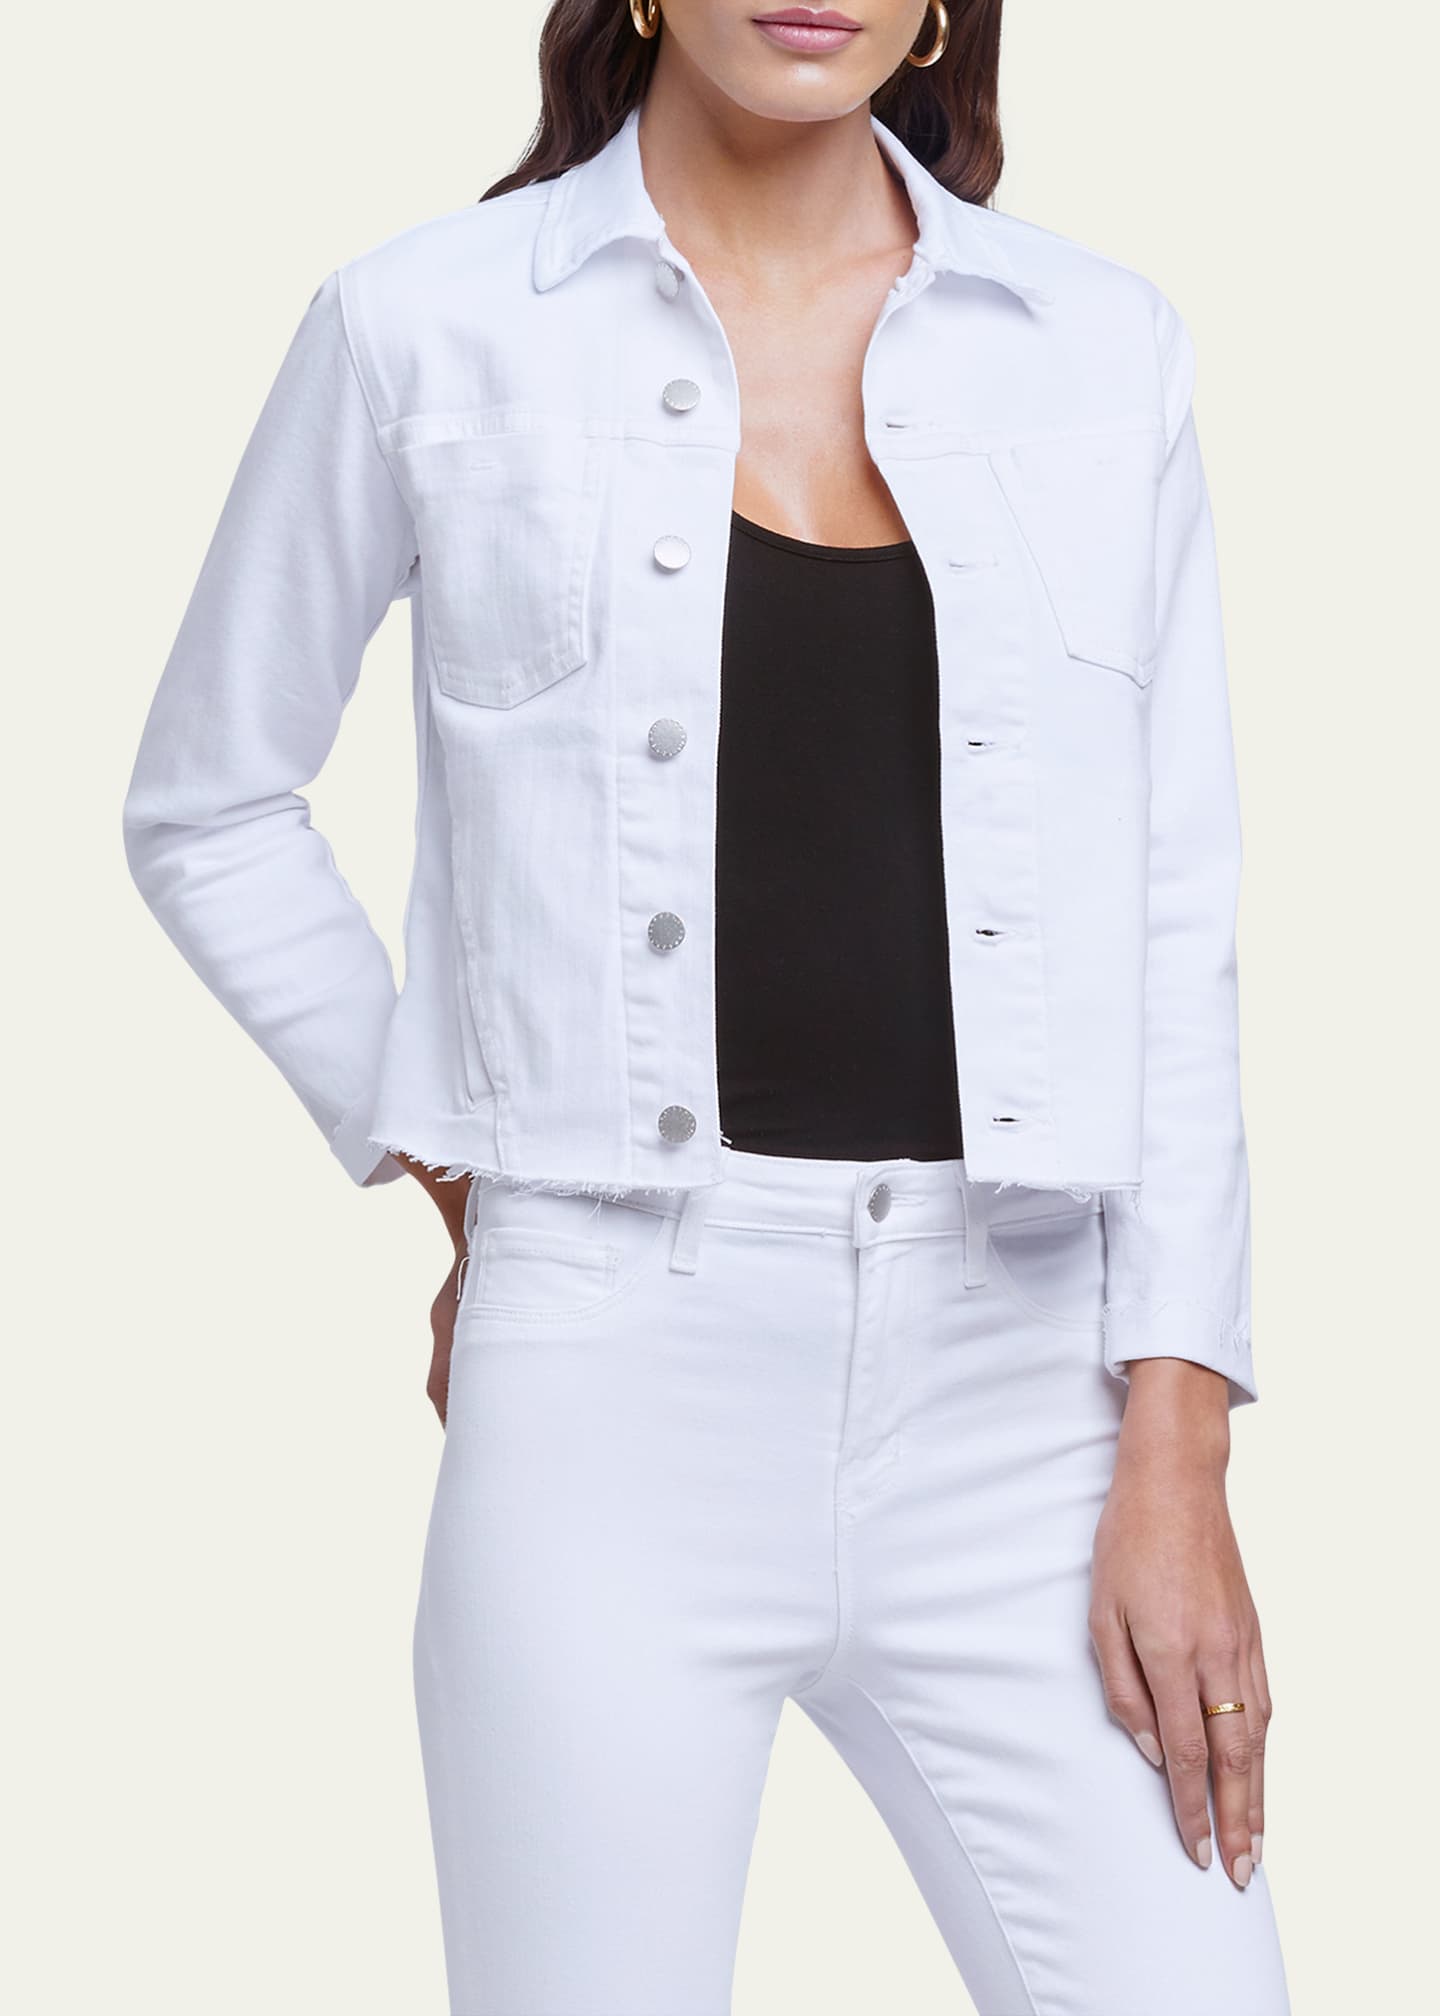 L'Agence Janelle Slim Cropped Jean Jacket with Raw Hem Image 4 of 5